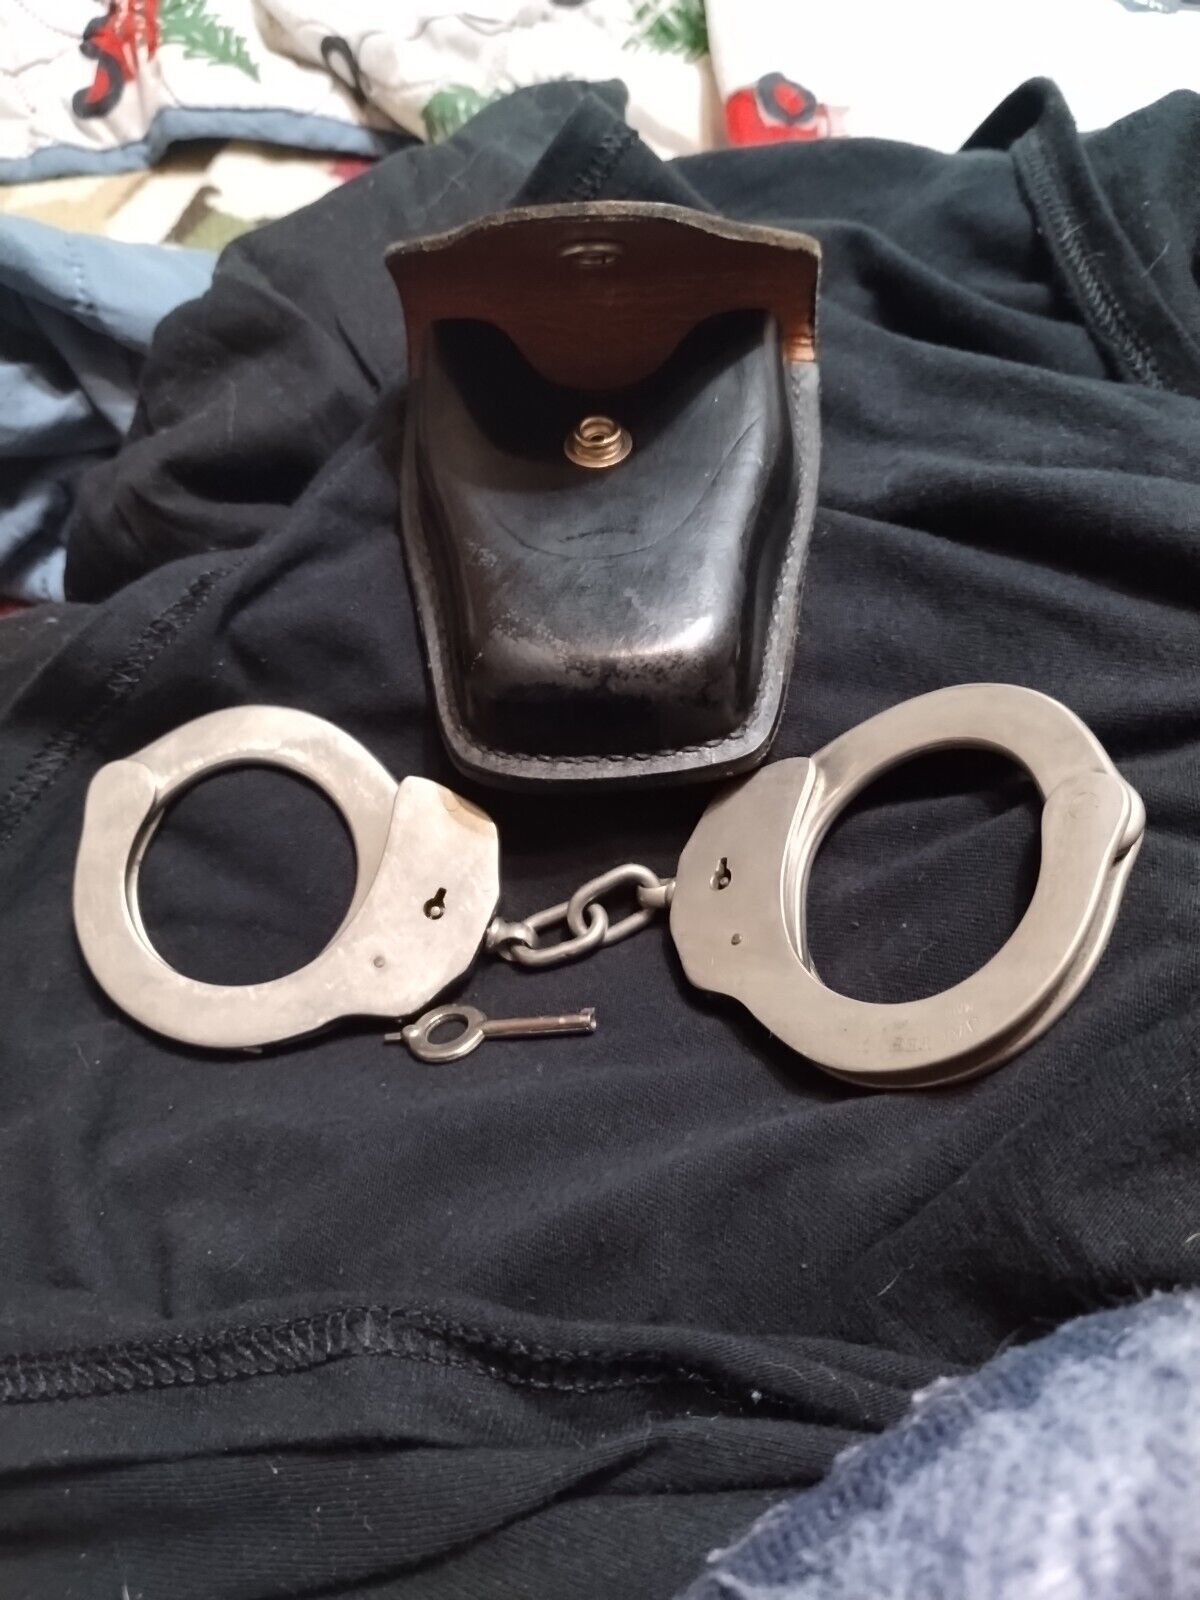 Vintage 1974 Jay-pee Police Handcuffs With Key And Original Belt Pouch